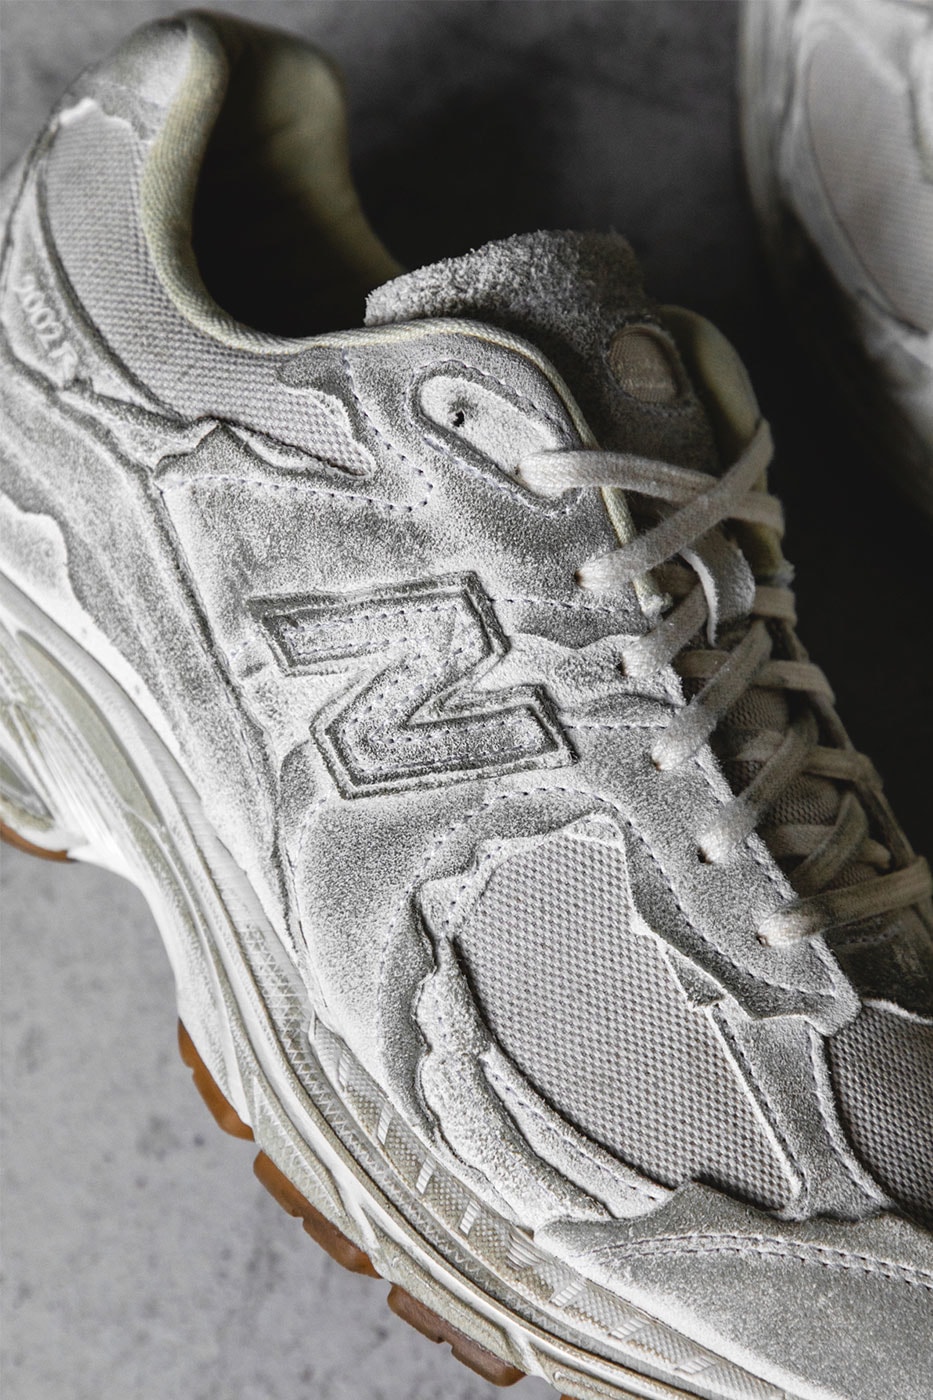 New Balance 2002R Protection Pack Deconstructed Sneakers Release HBX Price